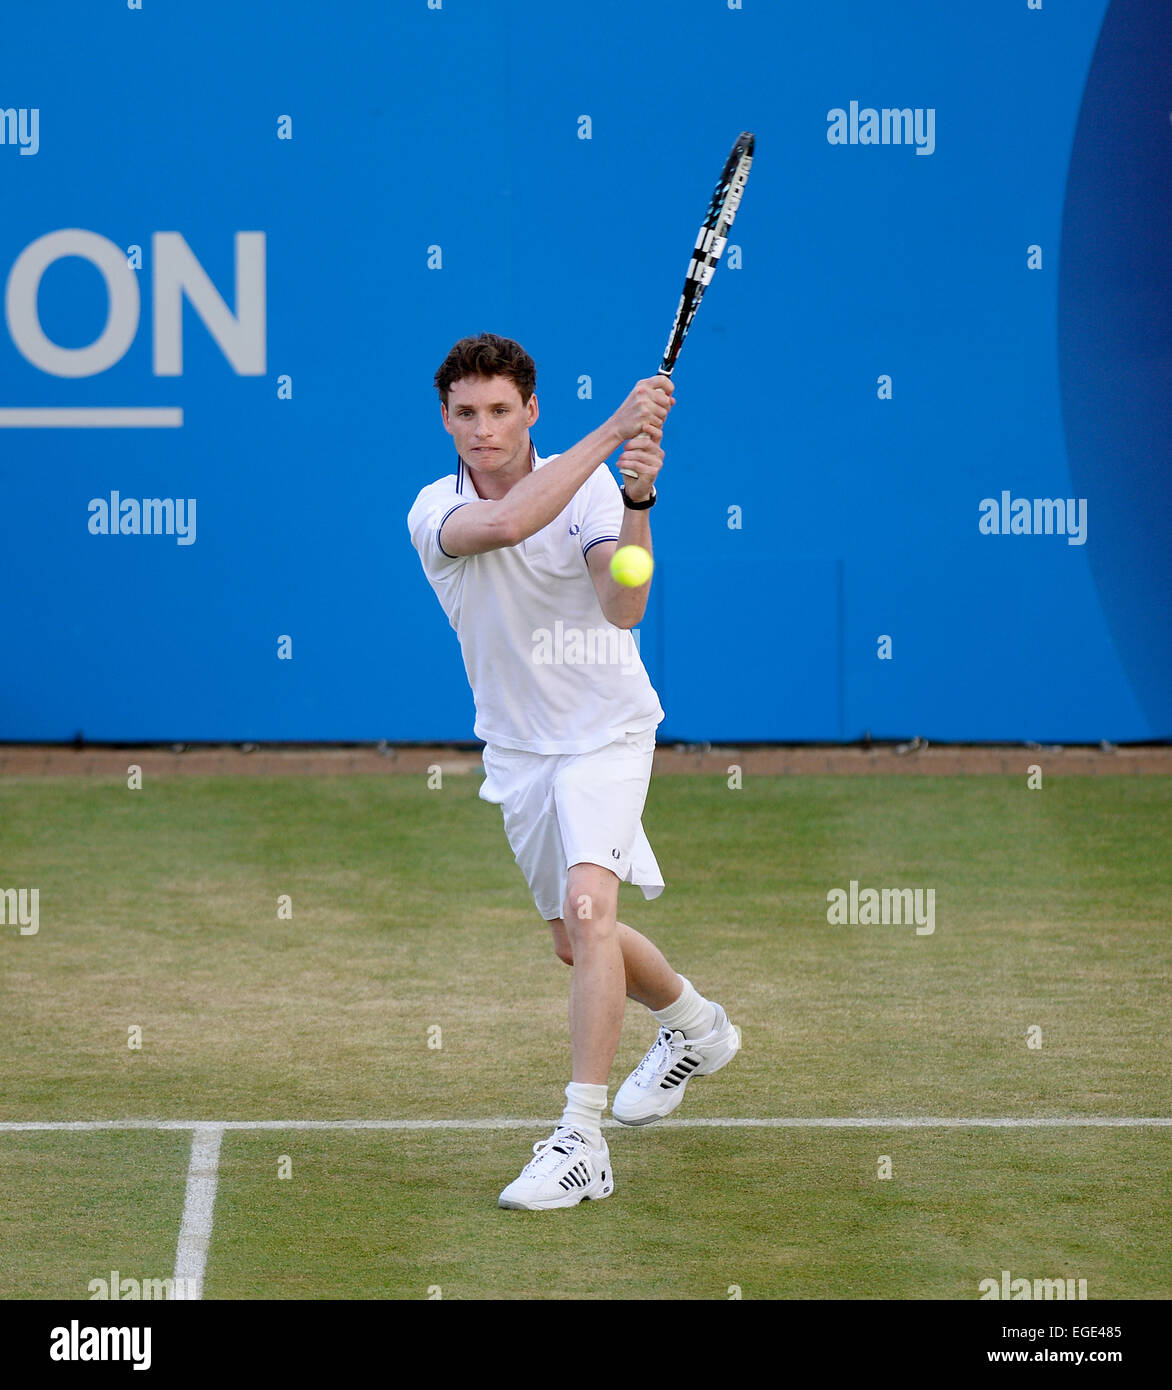 Actor Eddie Redmayne plays tennis during a charity match at Queen's Club in London 2013. Redmayne recently won a Oscar in 2015. Stock Photo